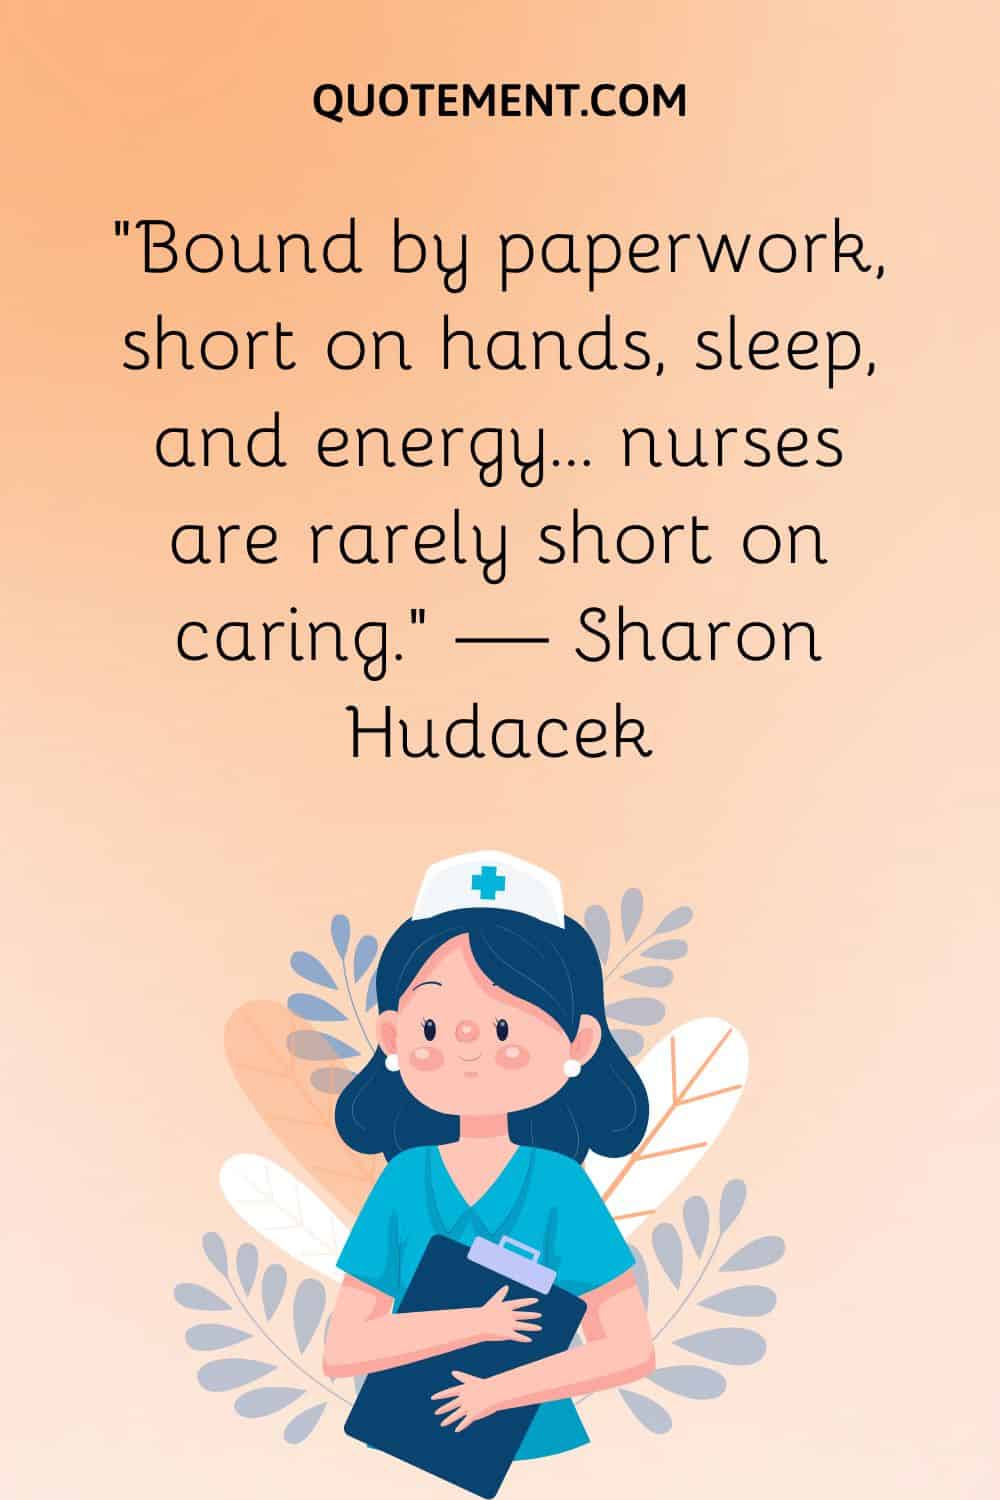 “Bound by paperwork, short on hands, sleep, and energy… nurses are rarely short on caring.” — Sharon Hudacek